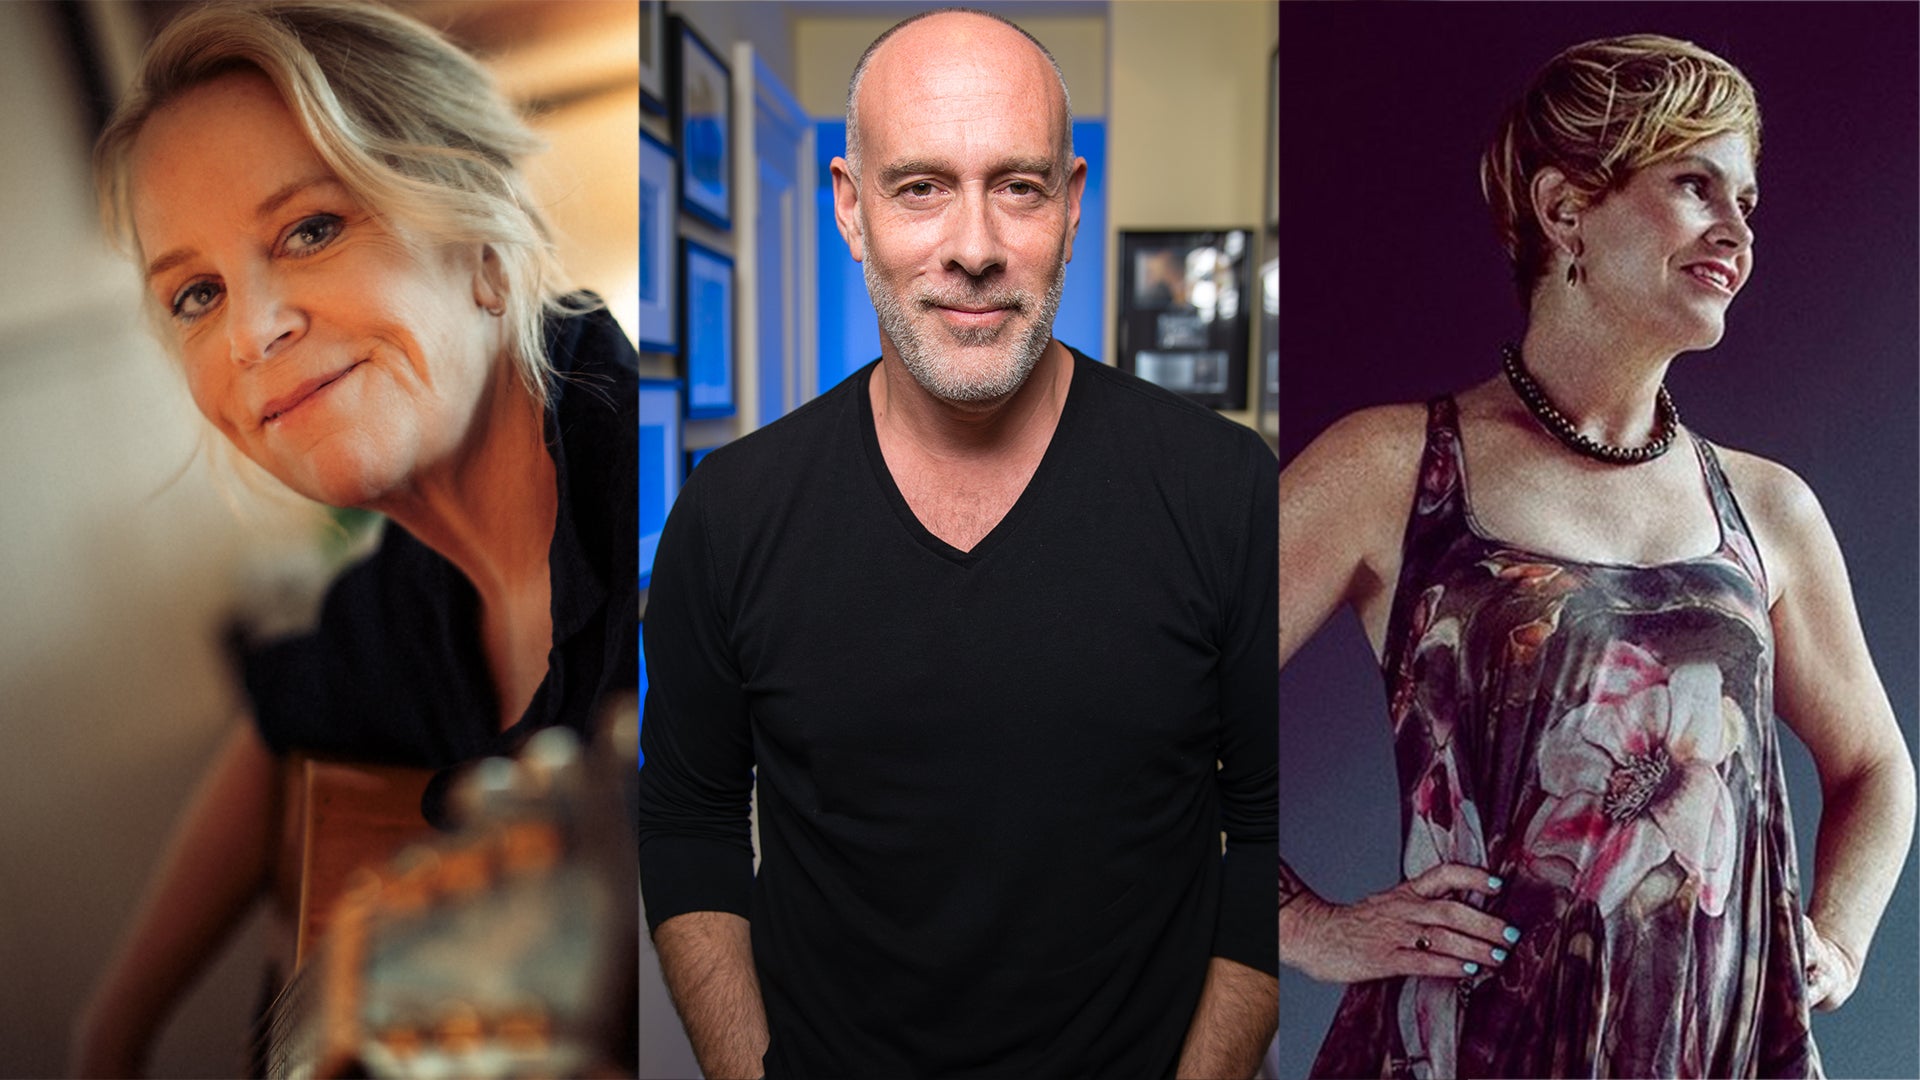 (CANCELED) Mary Chapin Carpenter • Marc Cohn • Shawn Colvin: Together in Concert